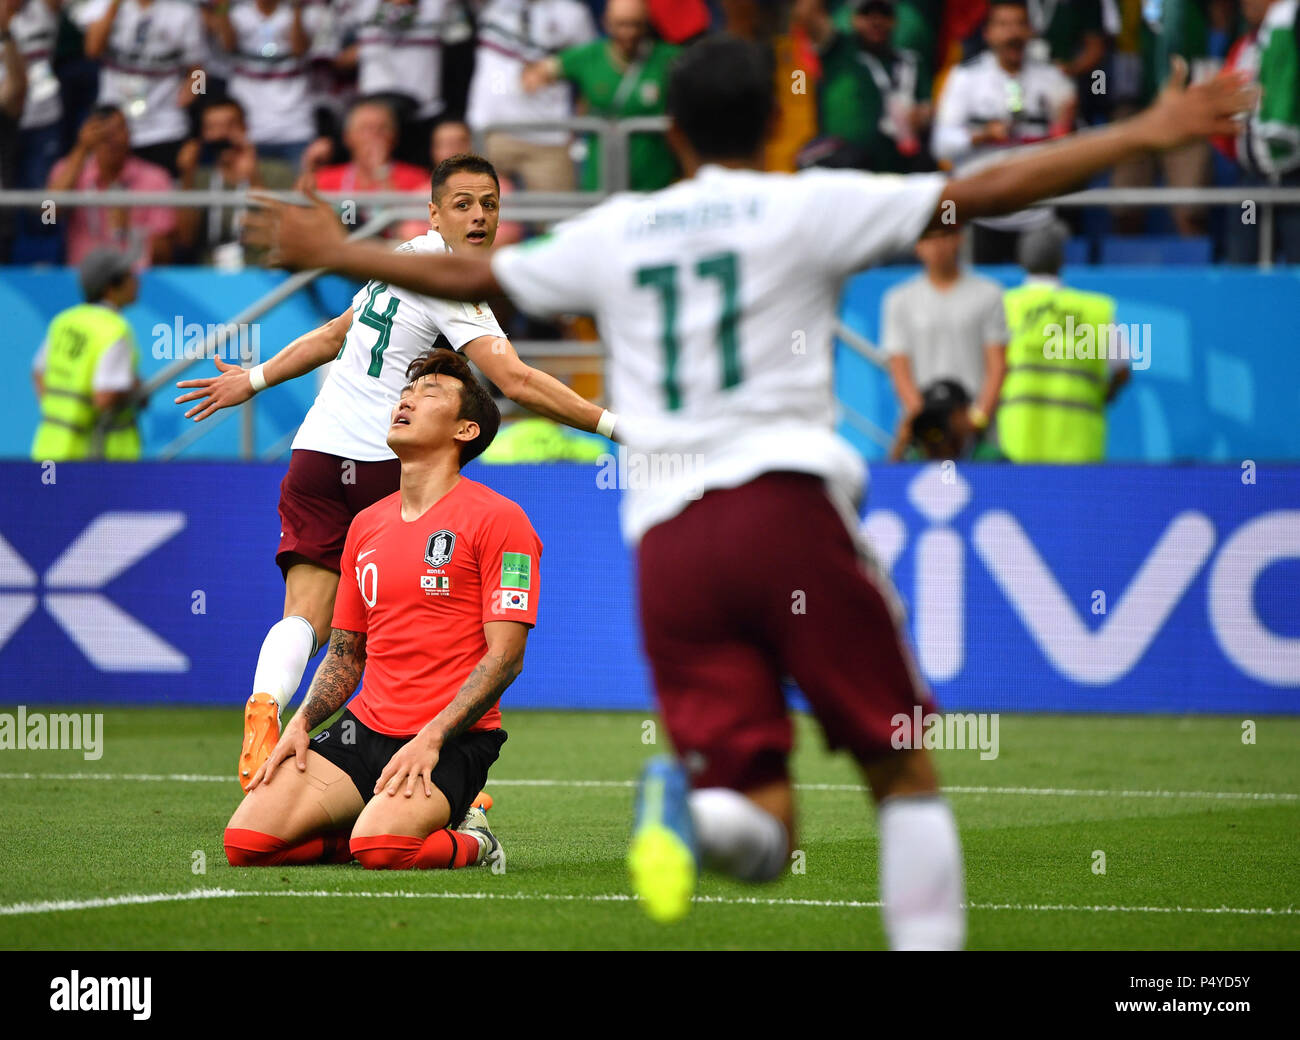 Rostov On Don. 23rd June, 2018. Javier Hernandez (L top) of Mexico celebrates scoring during the 2018 FIFA World Cup Group F match between South Korea and Mexico in Rostov-on-Don, Russia, June 23, 2018. Credit: Li Ga/Xinhua/Alamy Live News Stock Photo